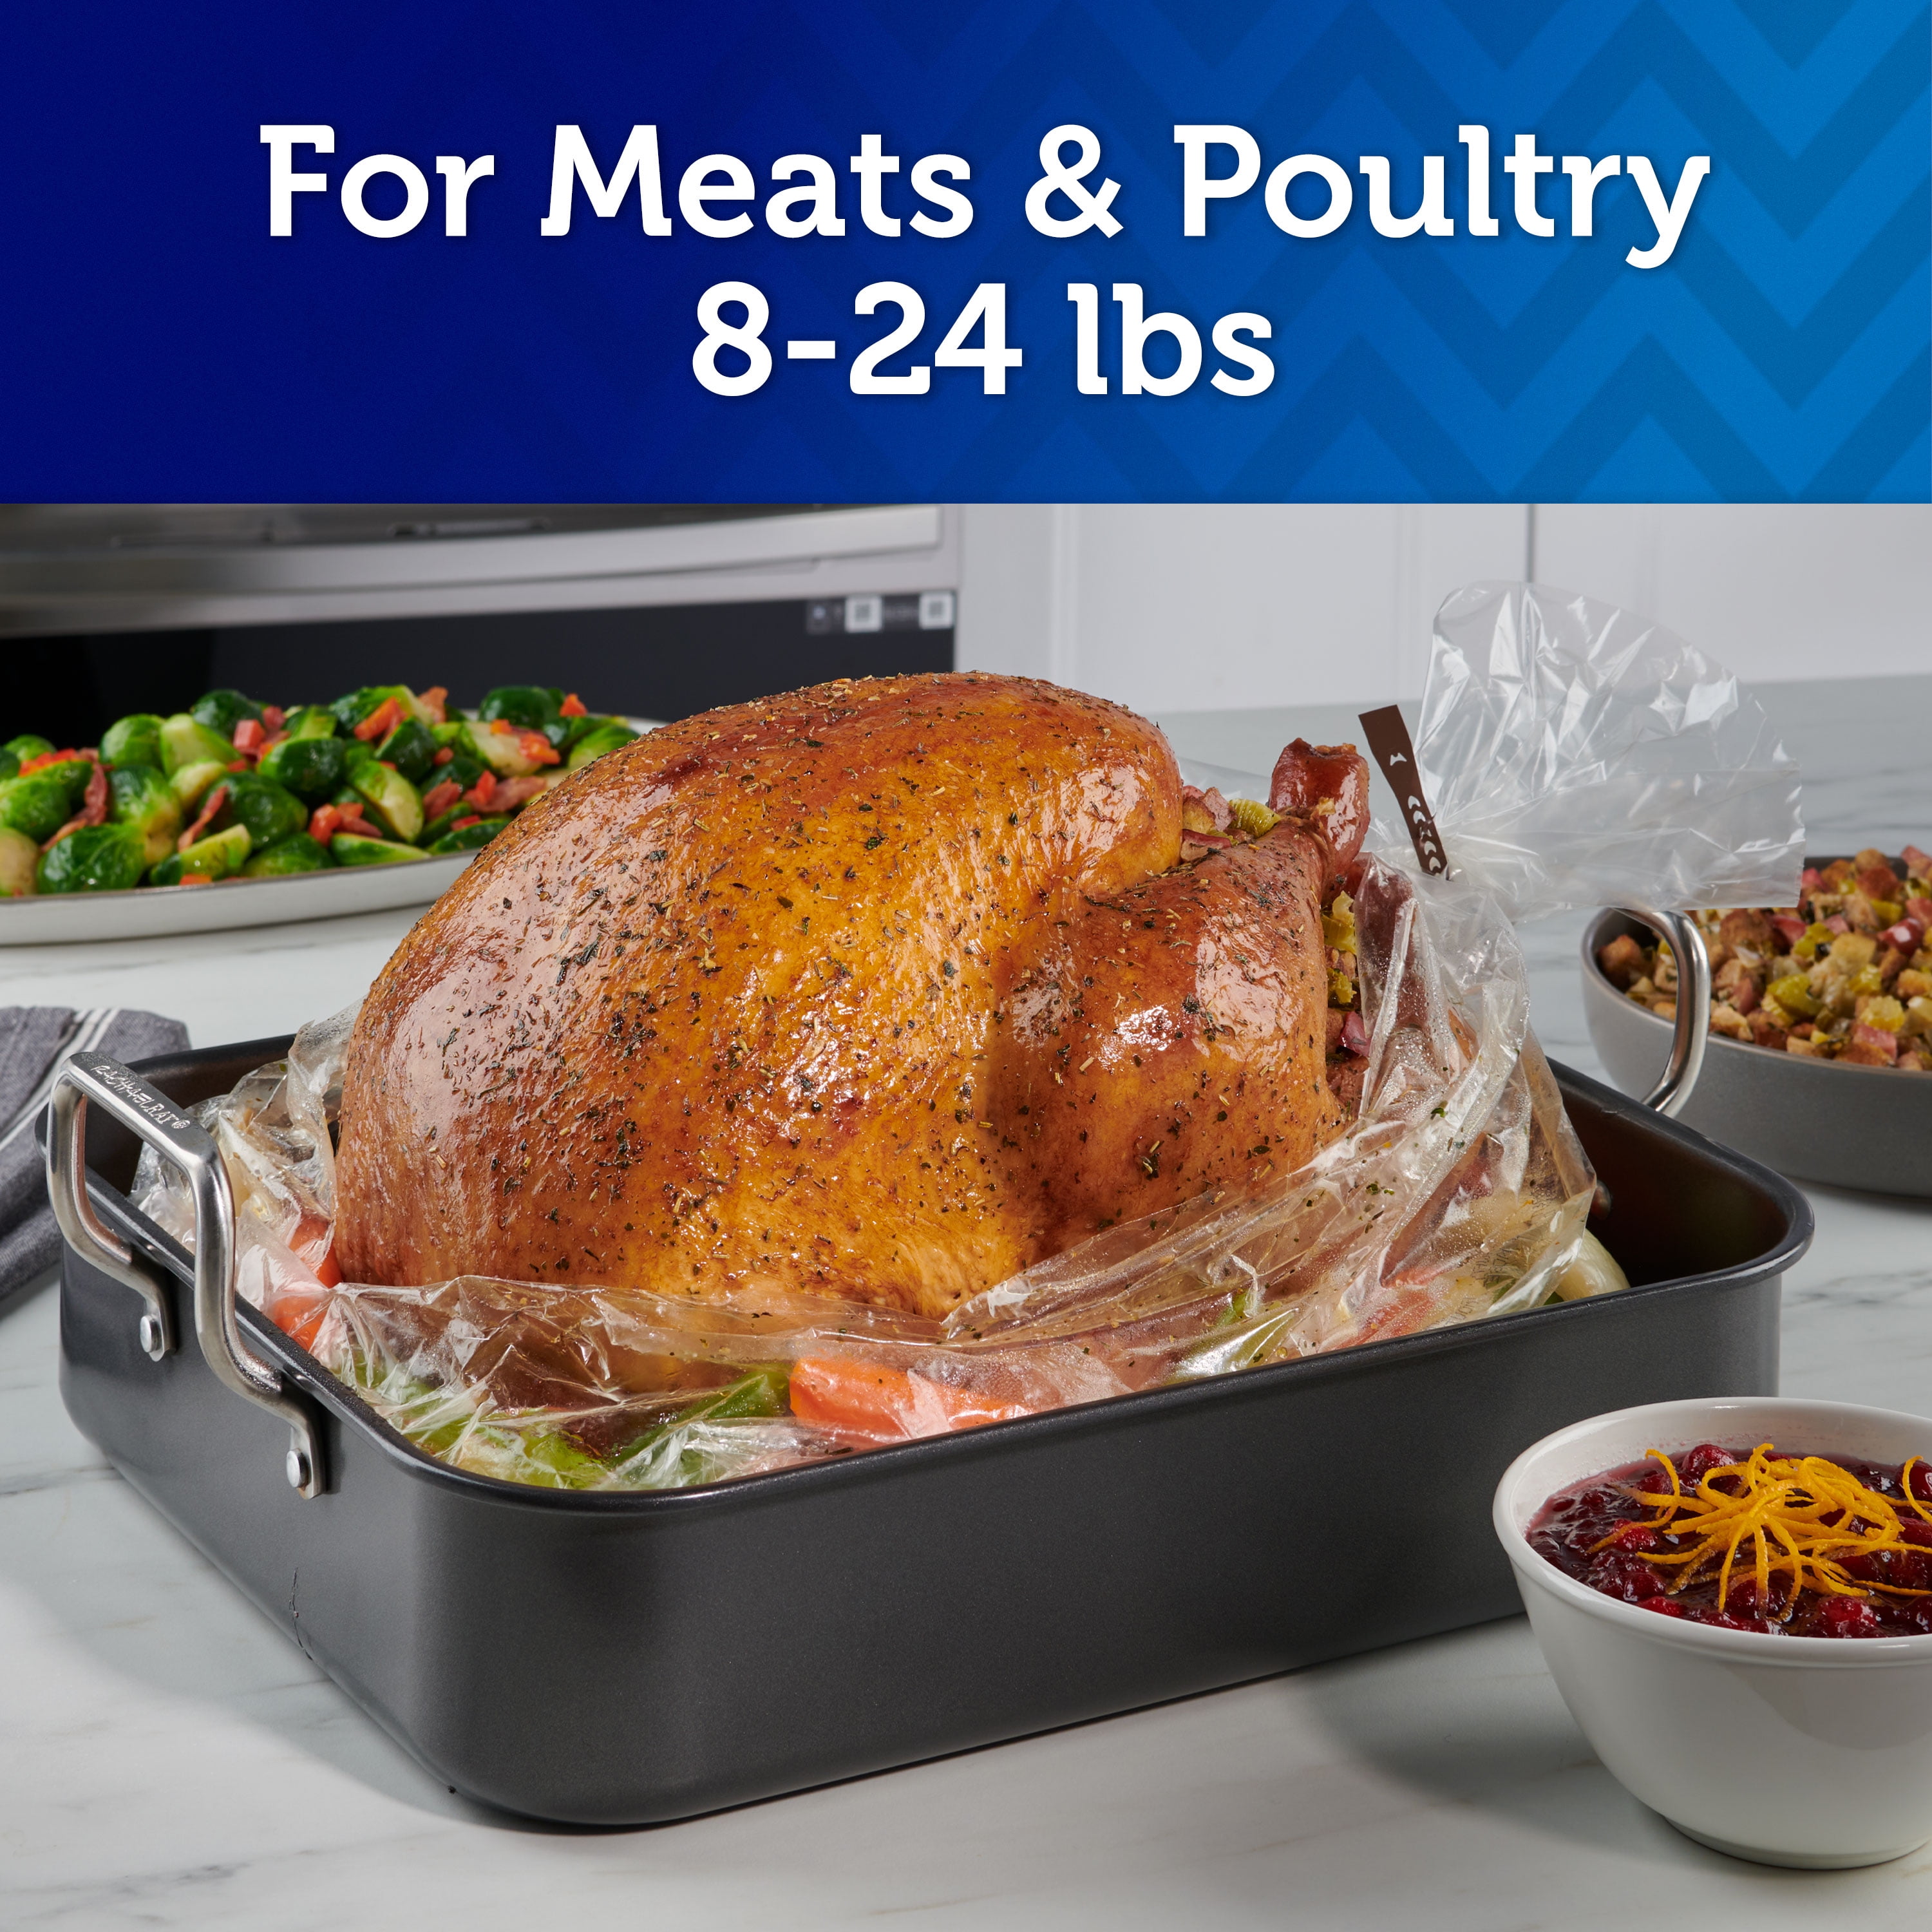 Reynolds Kitchens® Turkey Size Oven Bags, 2 ct - Fry's Food Stores